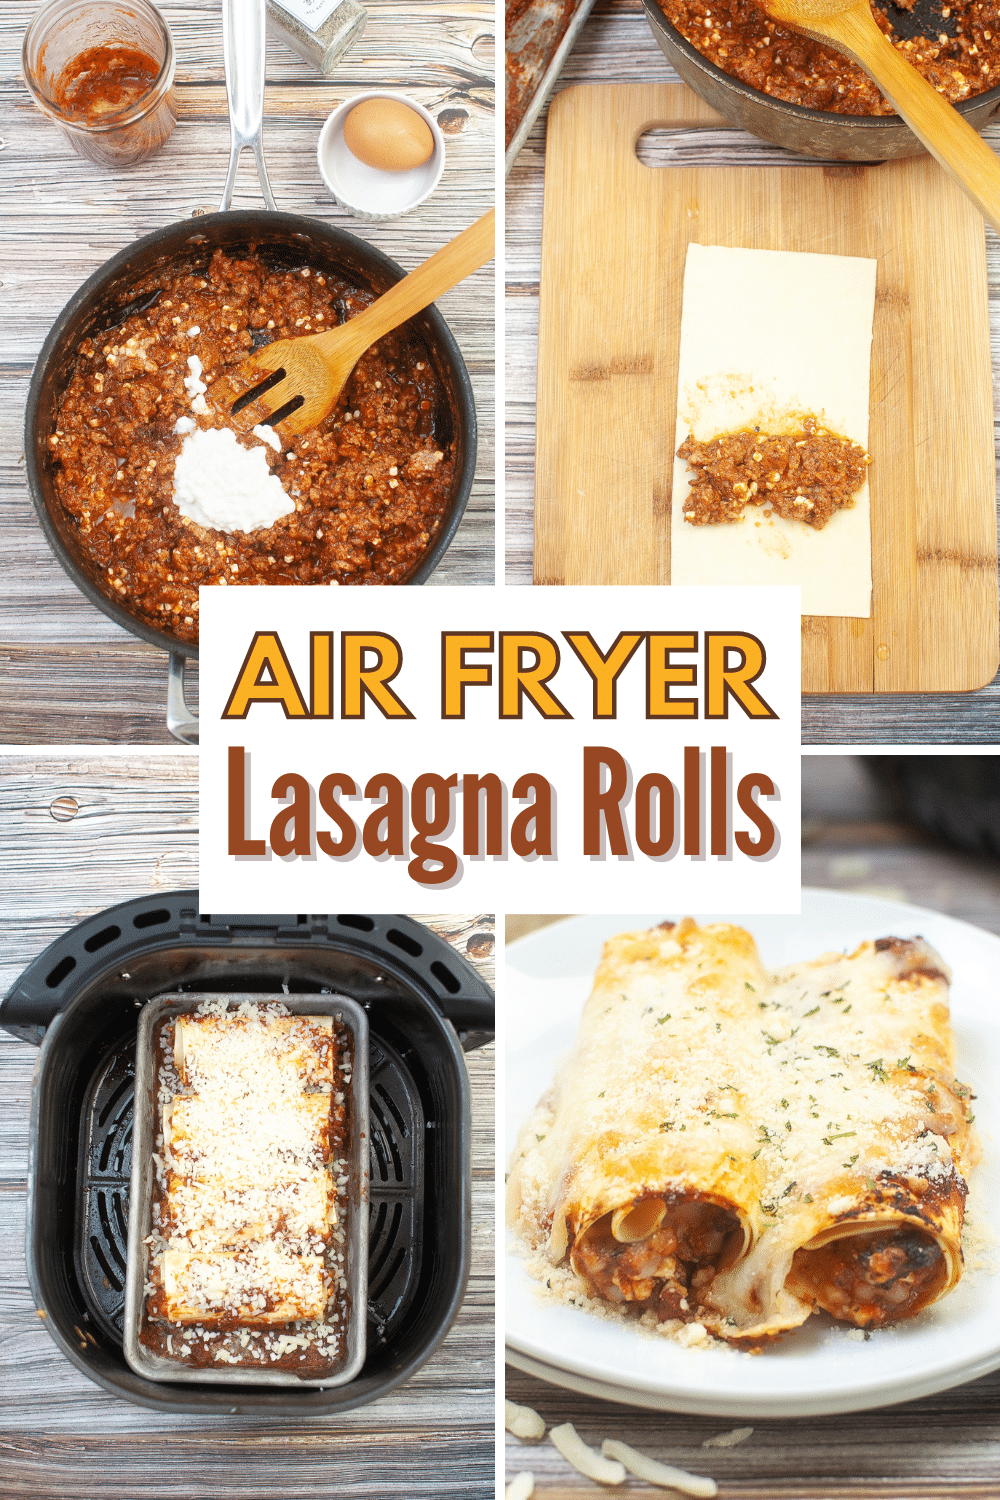 Discover the ultimate way to enjoy lasagna rolls with these delectable Air Fryer Lasagna Rolls.